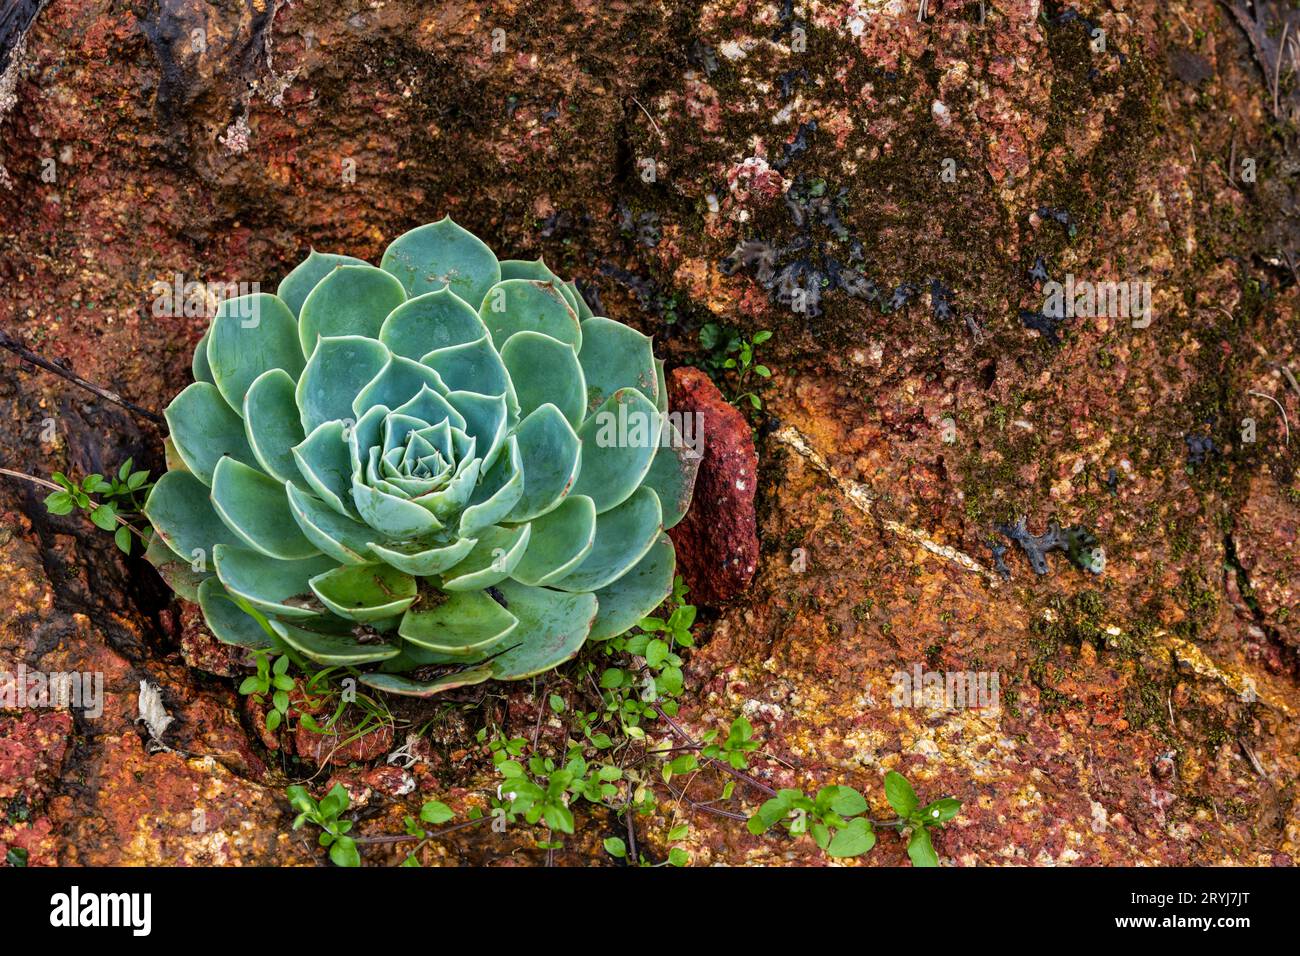 The rosette of a succulent plant Stock Photo